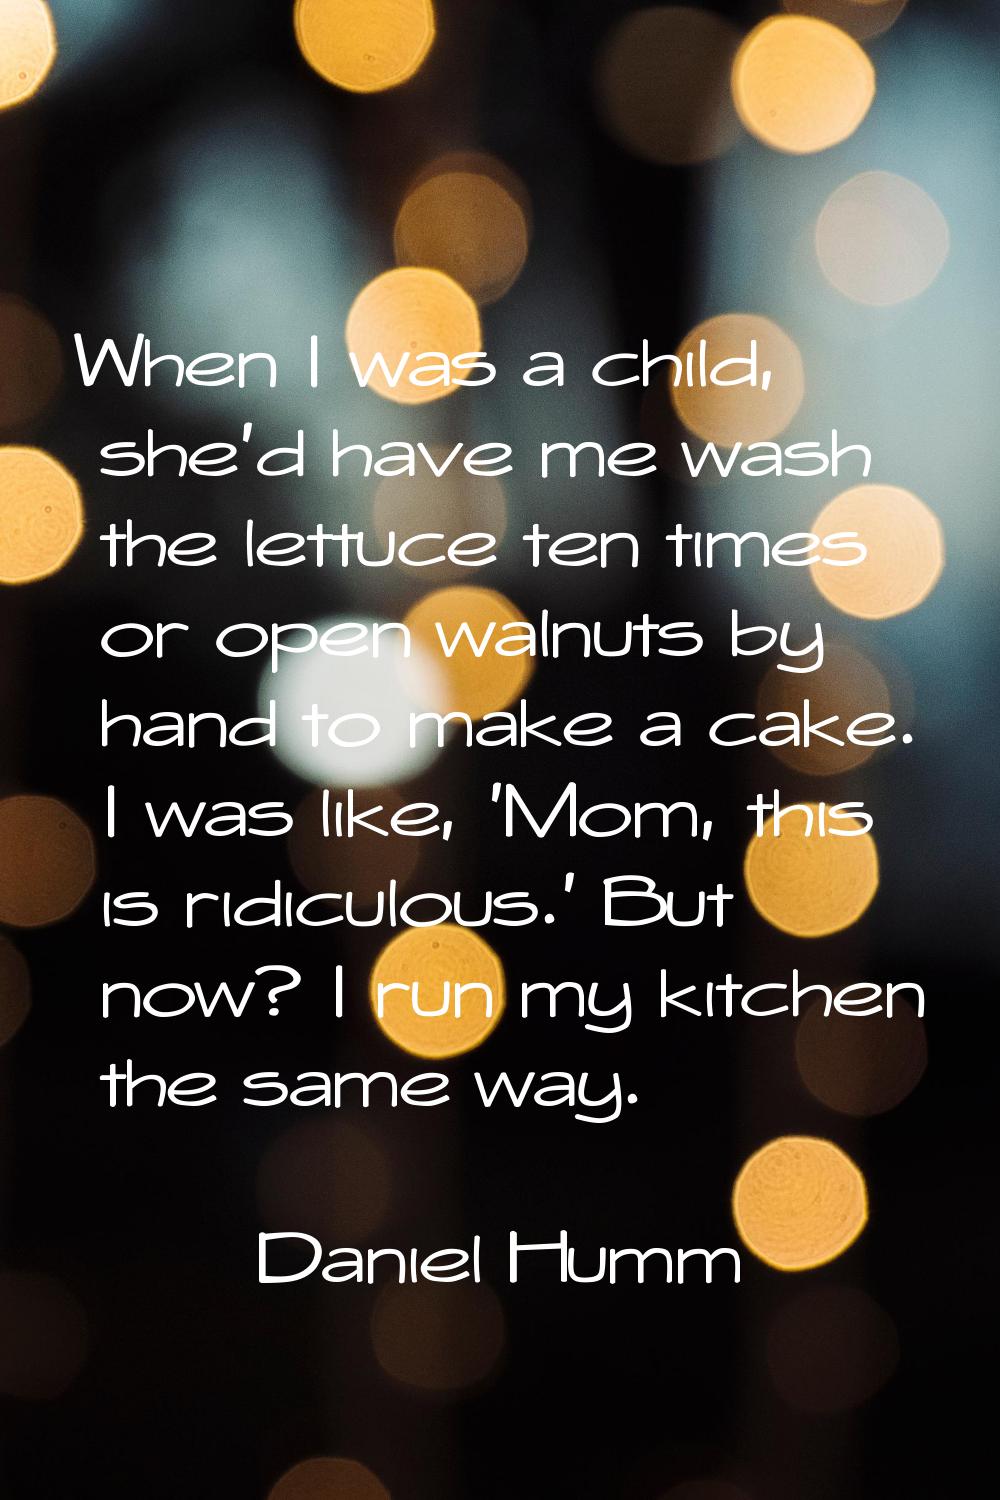 When I was a child, she'd have me wash the lettuce ten times or open walnuts by hand to make a cake